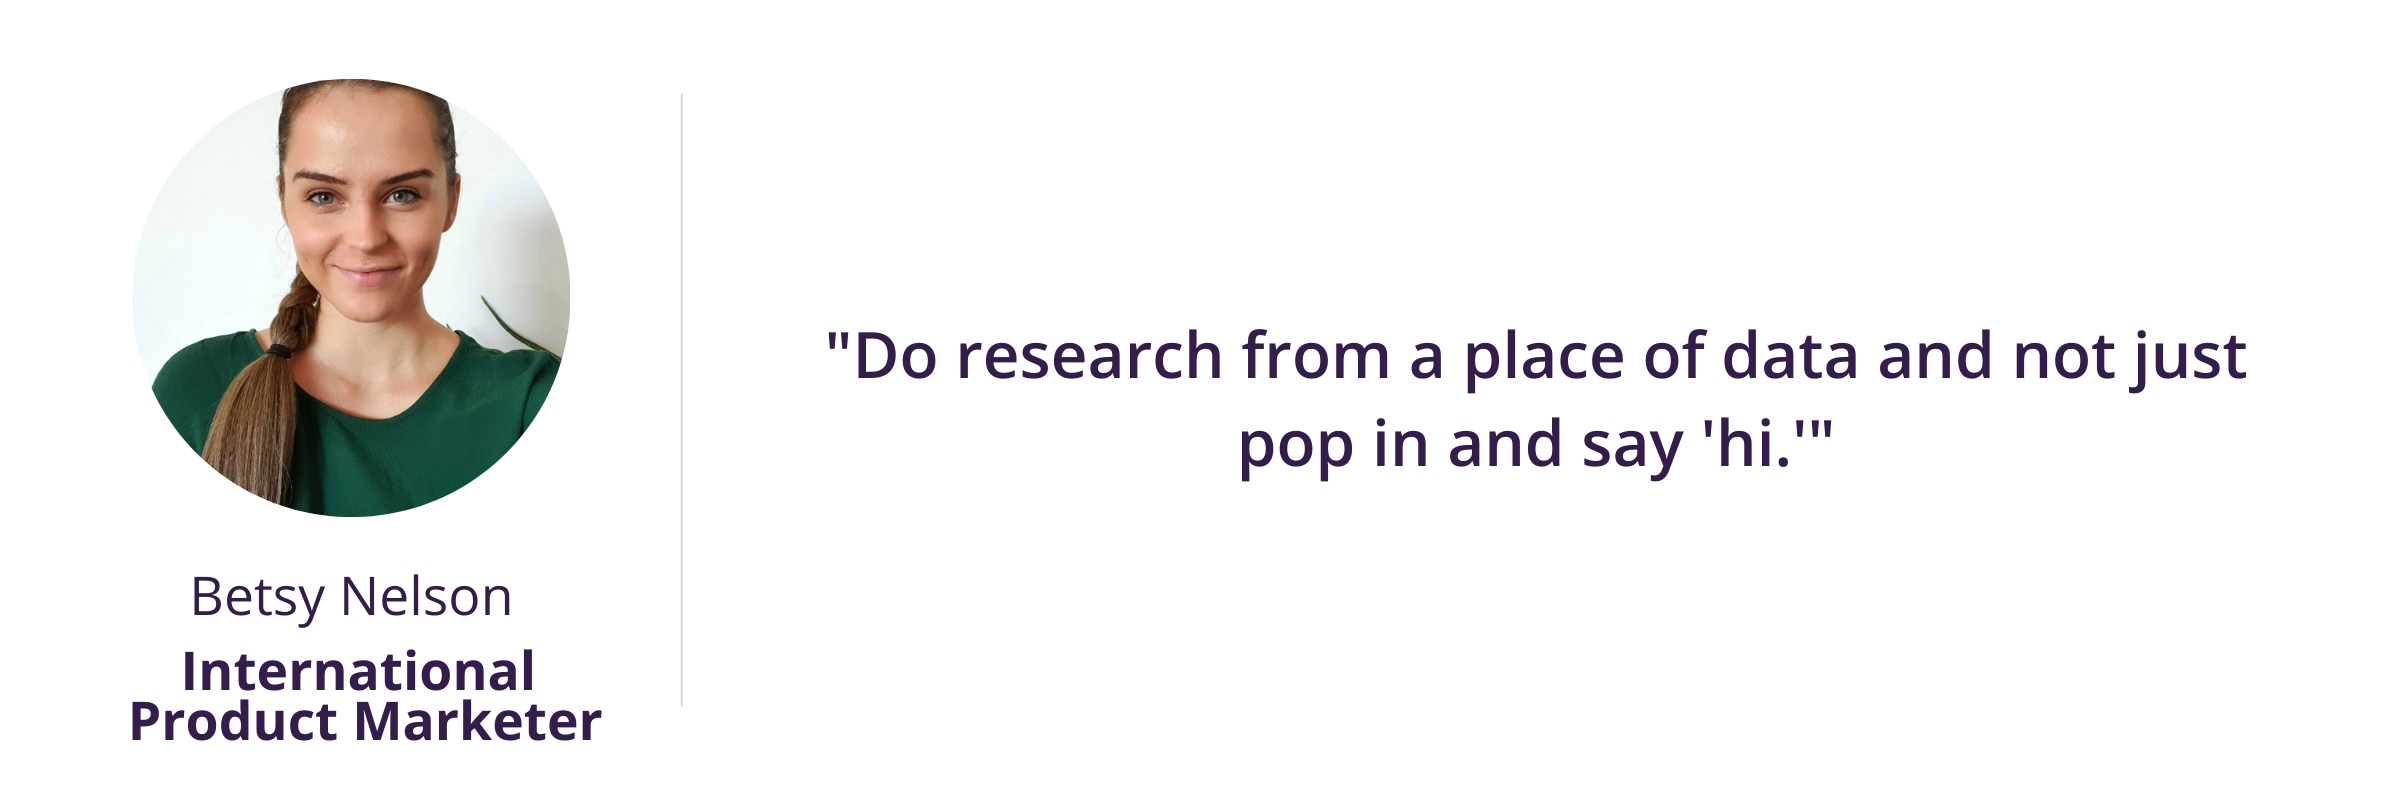 Do research from a place of data and not just pop in and say 'hi.'